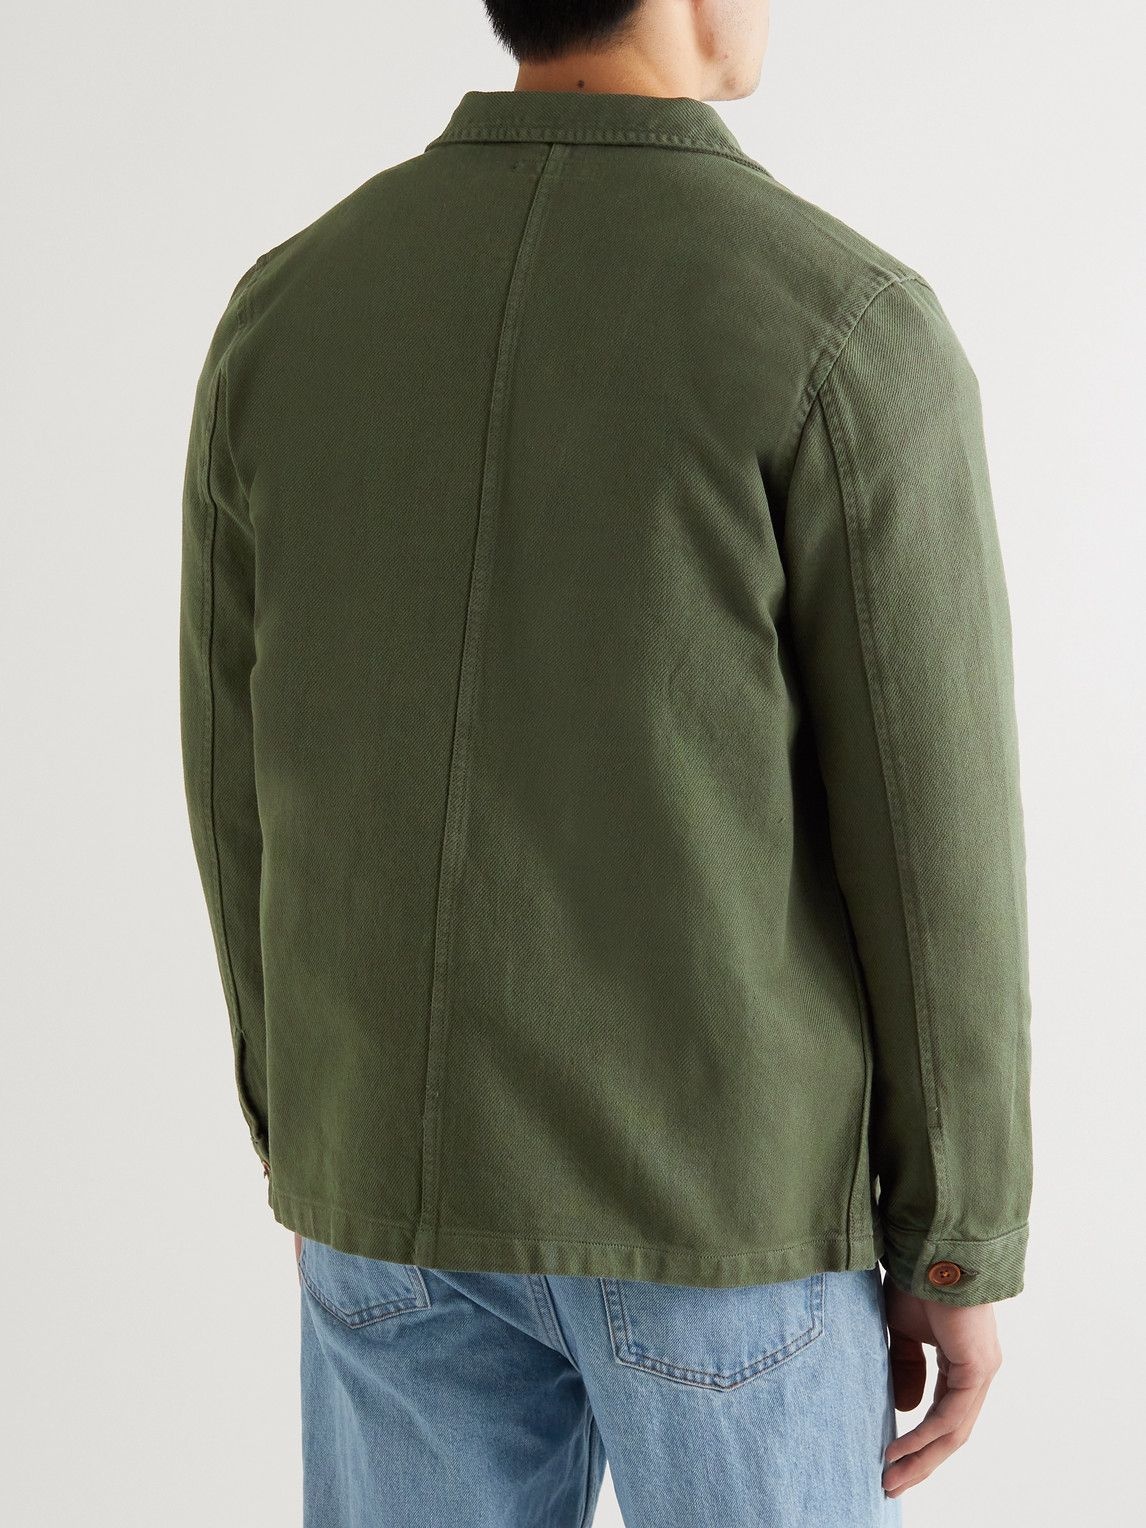 Nudie Jeans - Barney Organic Cotton-Twill Jacket - Green Nudie Jeans Co